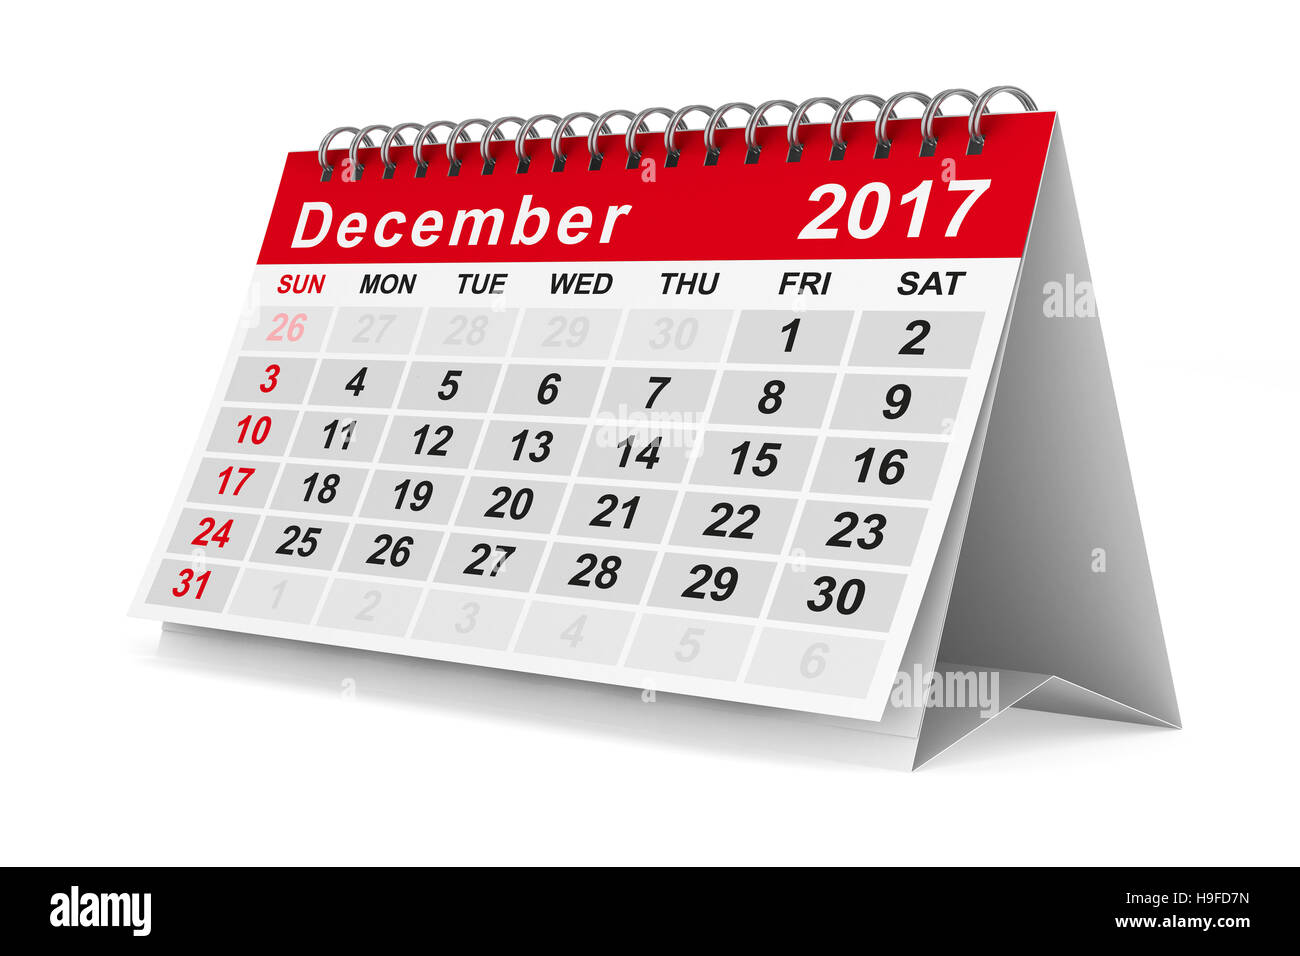 2017 year calendar. December. Isolated 3D image Stock Photo